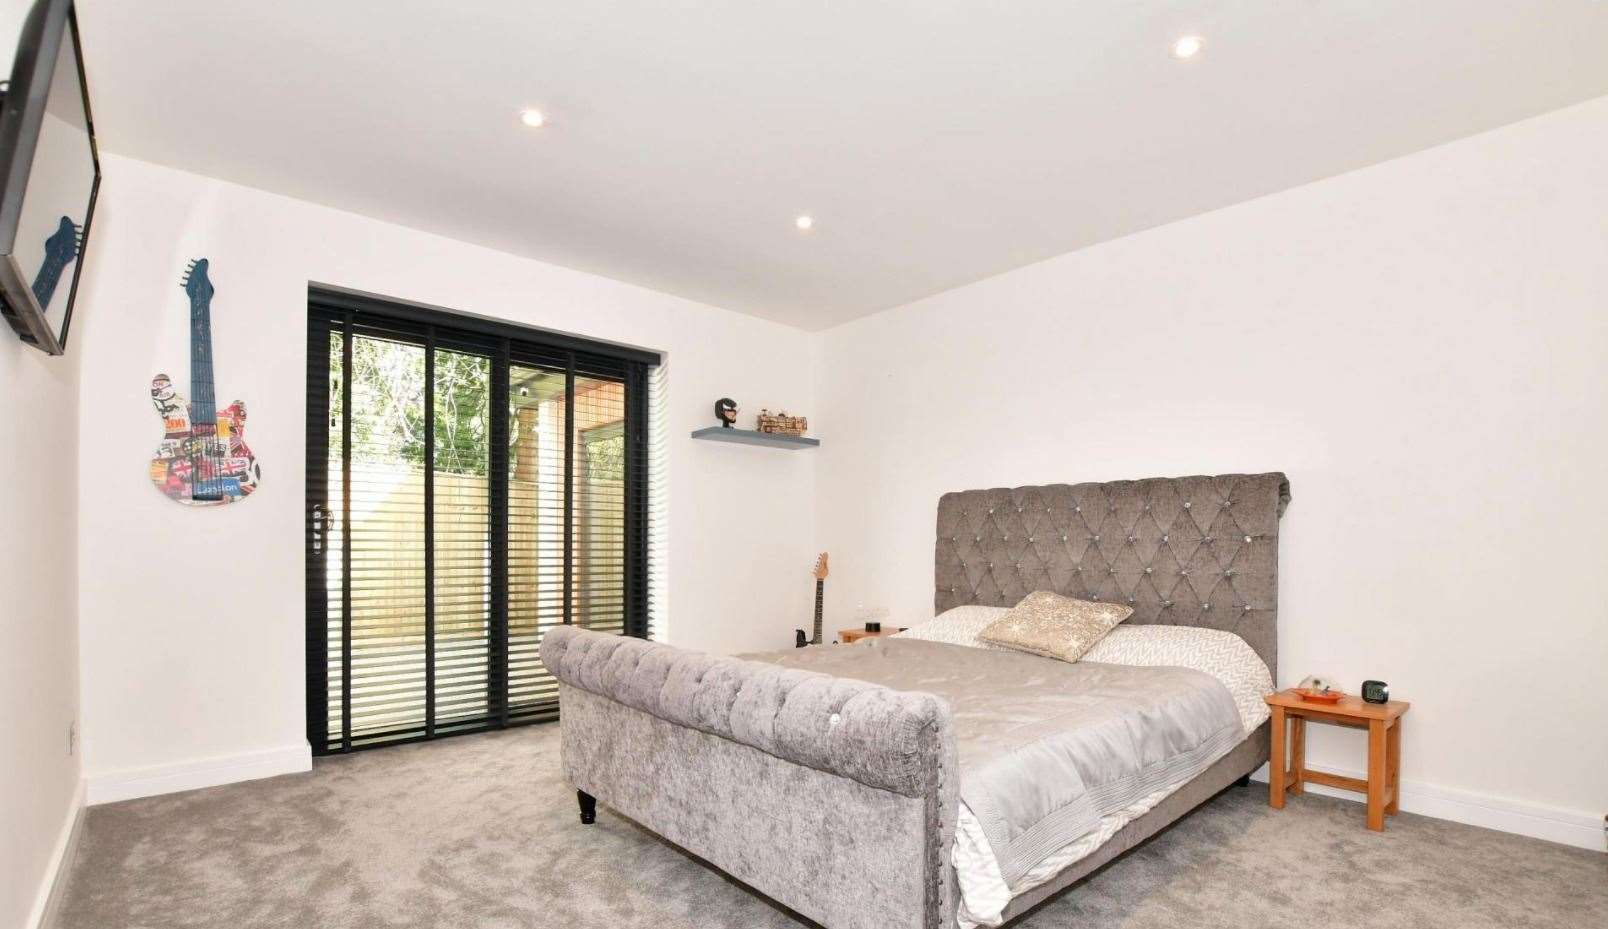 The guest bedroom features an en-suite and sliding glass door. Picture: Fine and Country